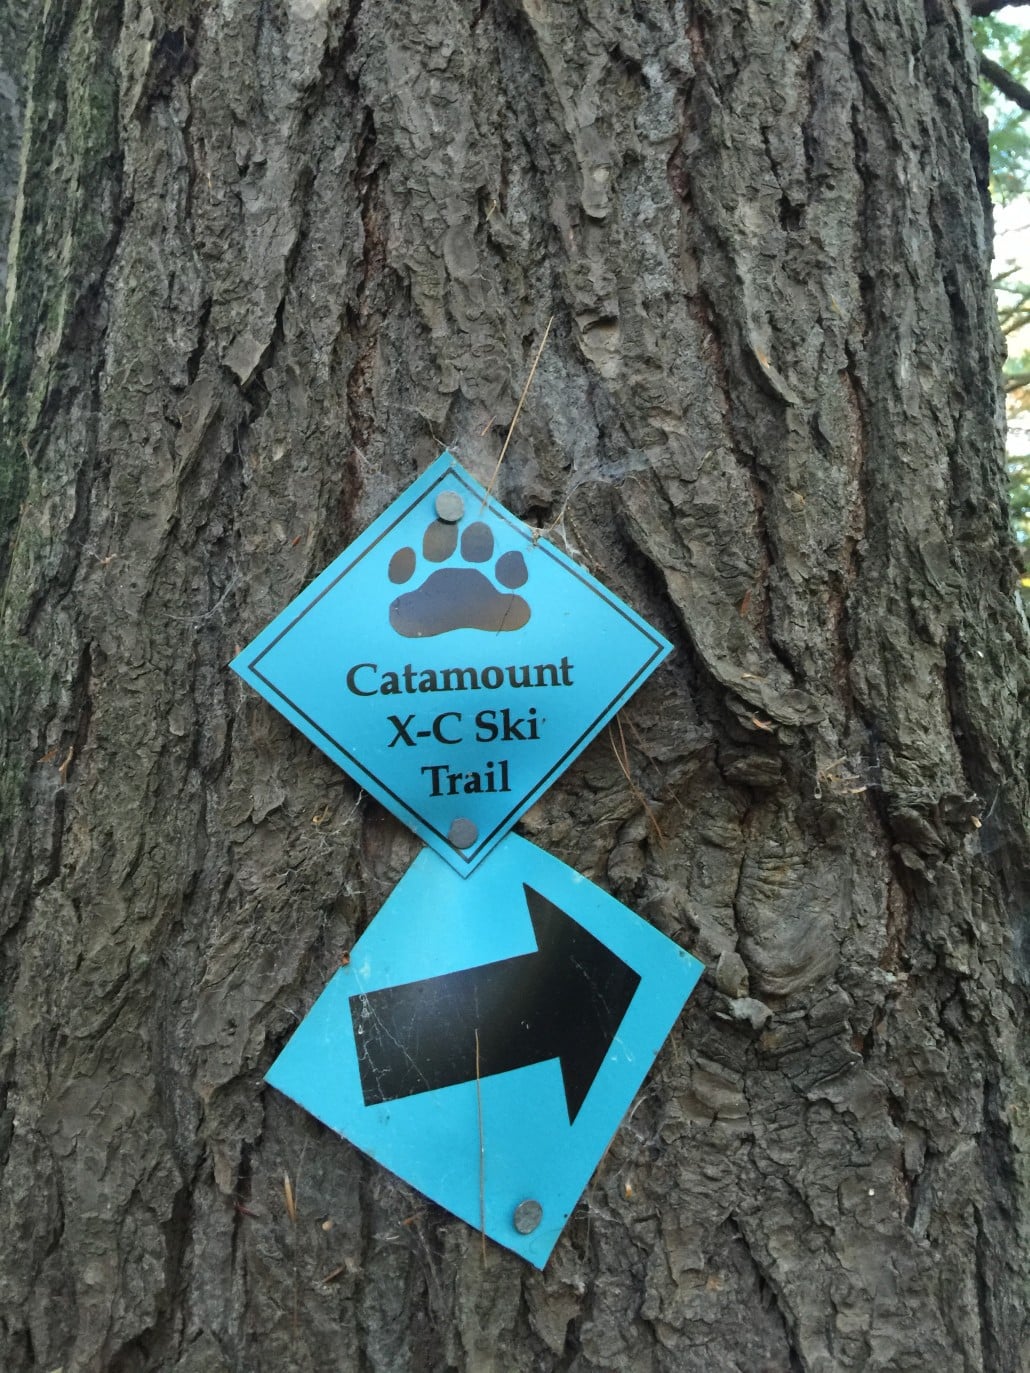 Catamount Trail outside of Topnotch